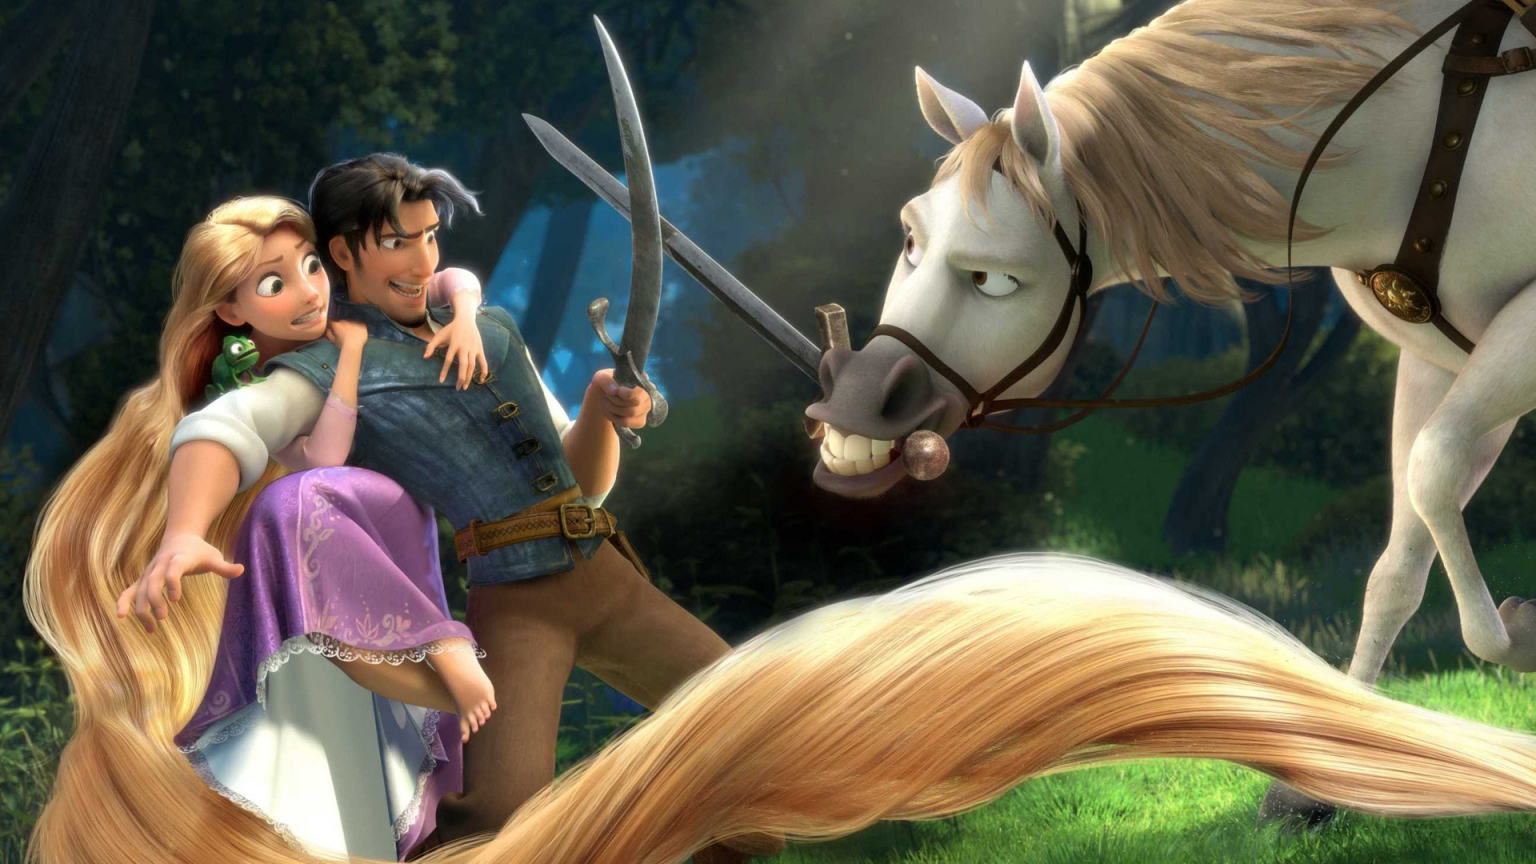 Tangled Movie for 1536 x 864 HDTV resolution